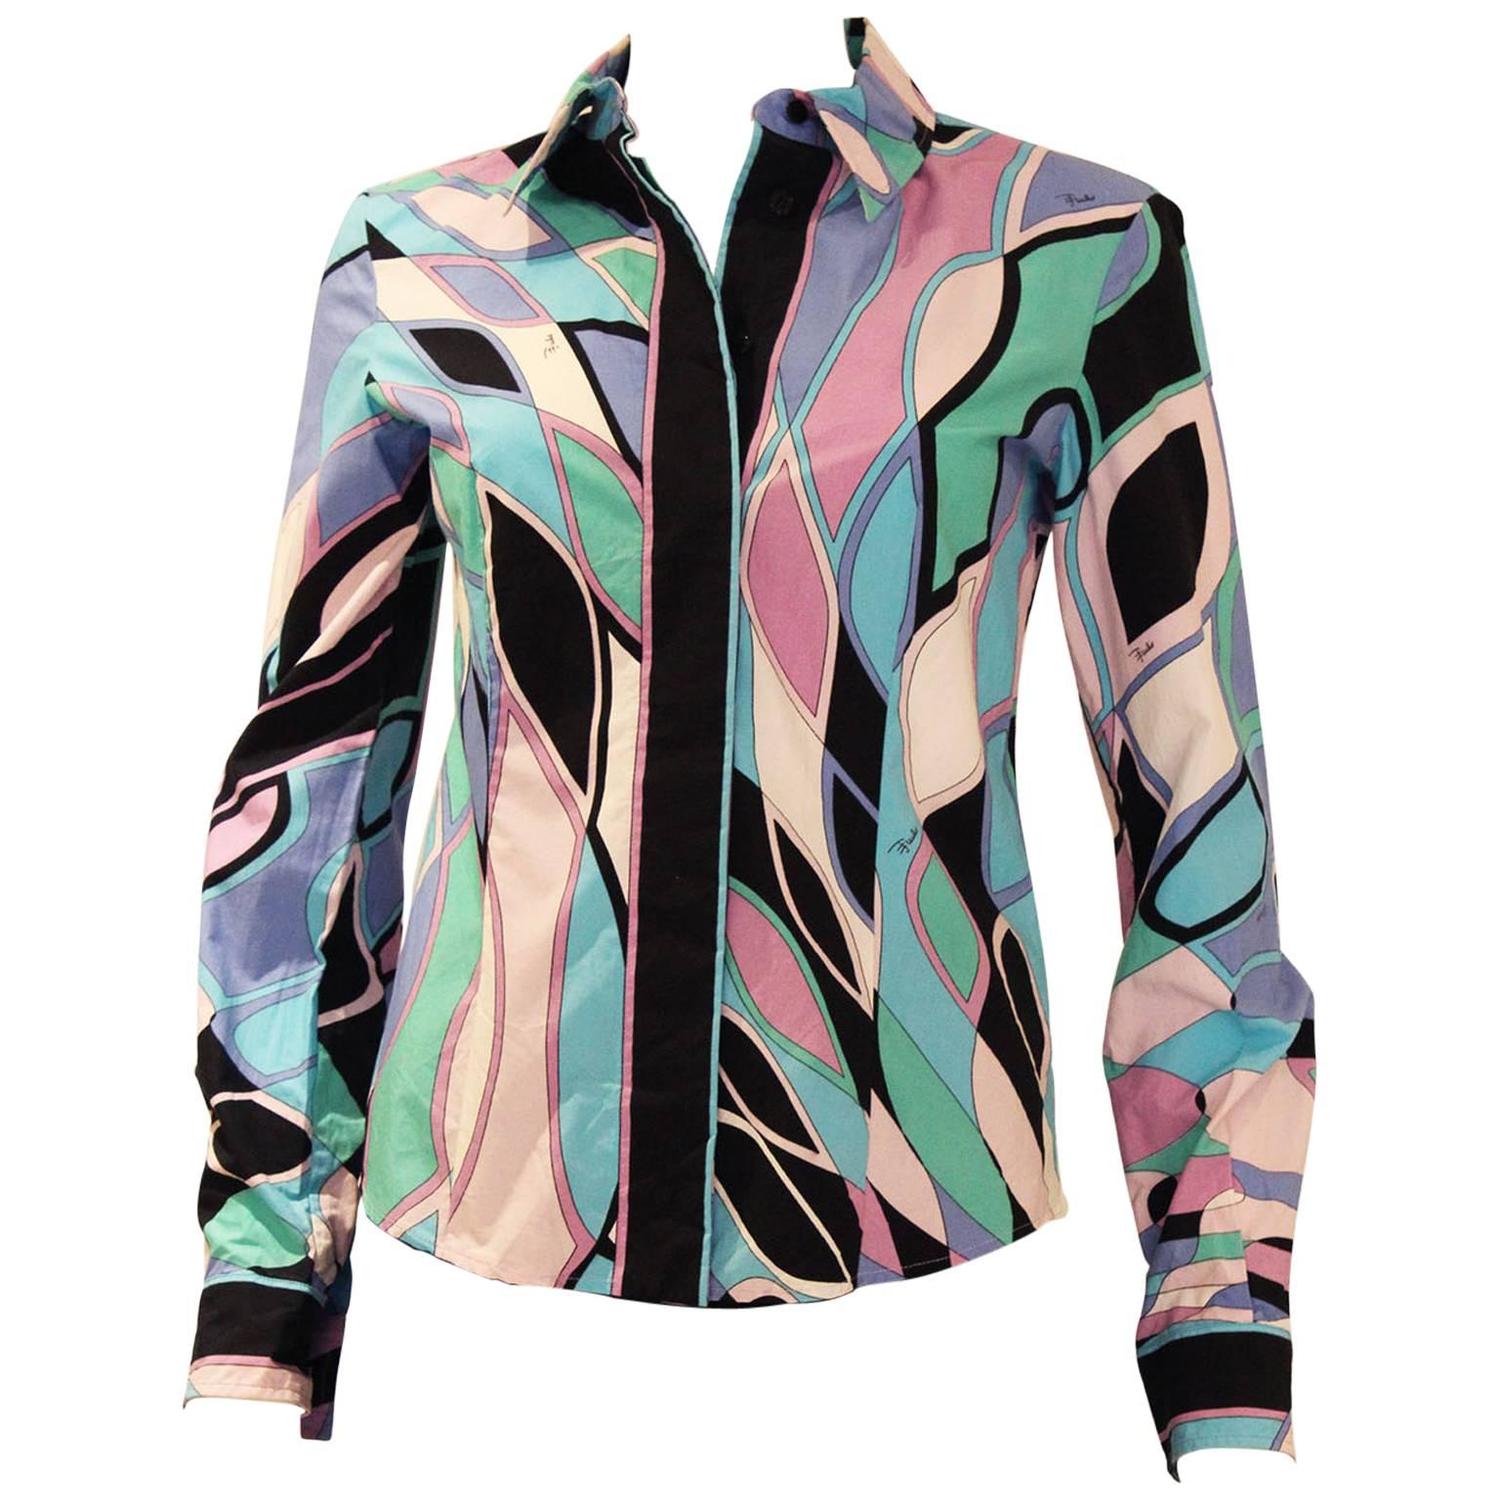 Cotton Shirt by Pucci For Sale at 1stdibs